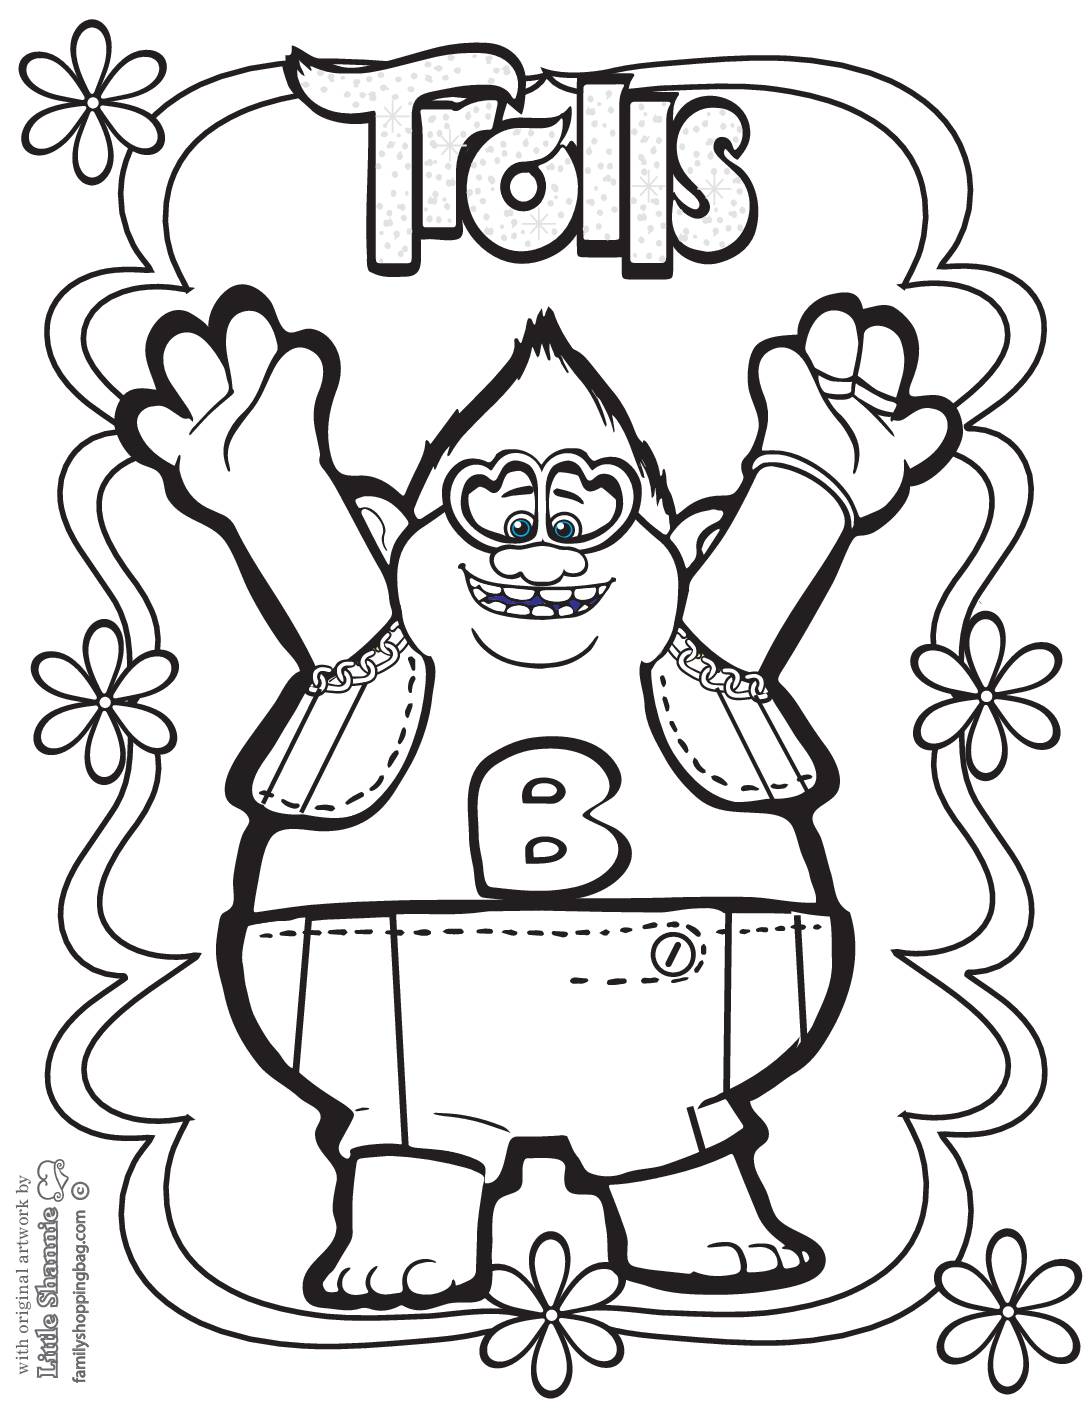 Coloring Page Trolls